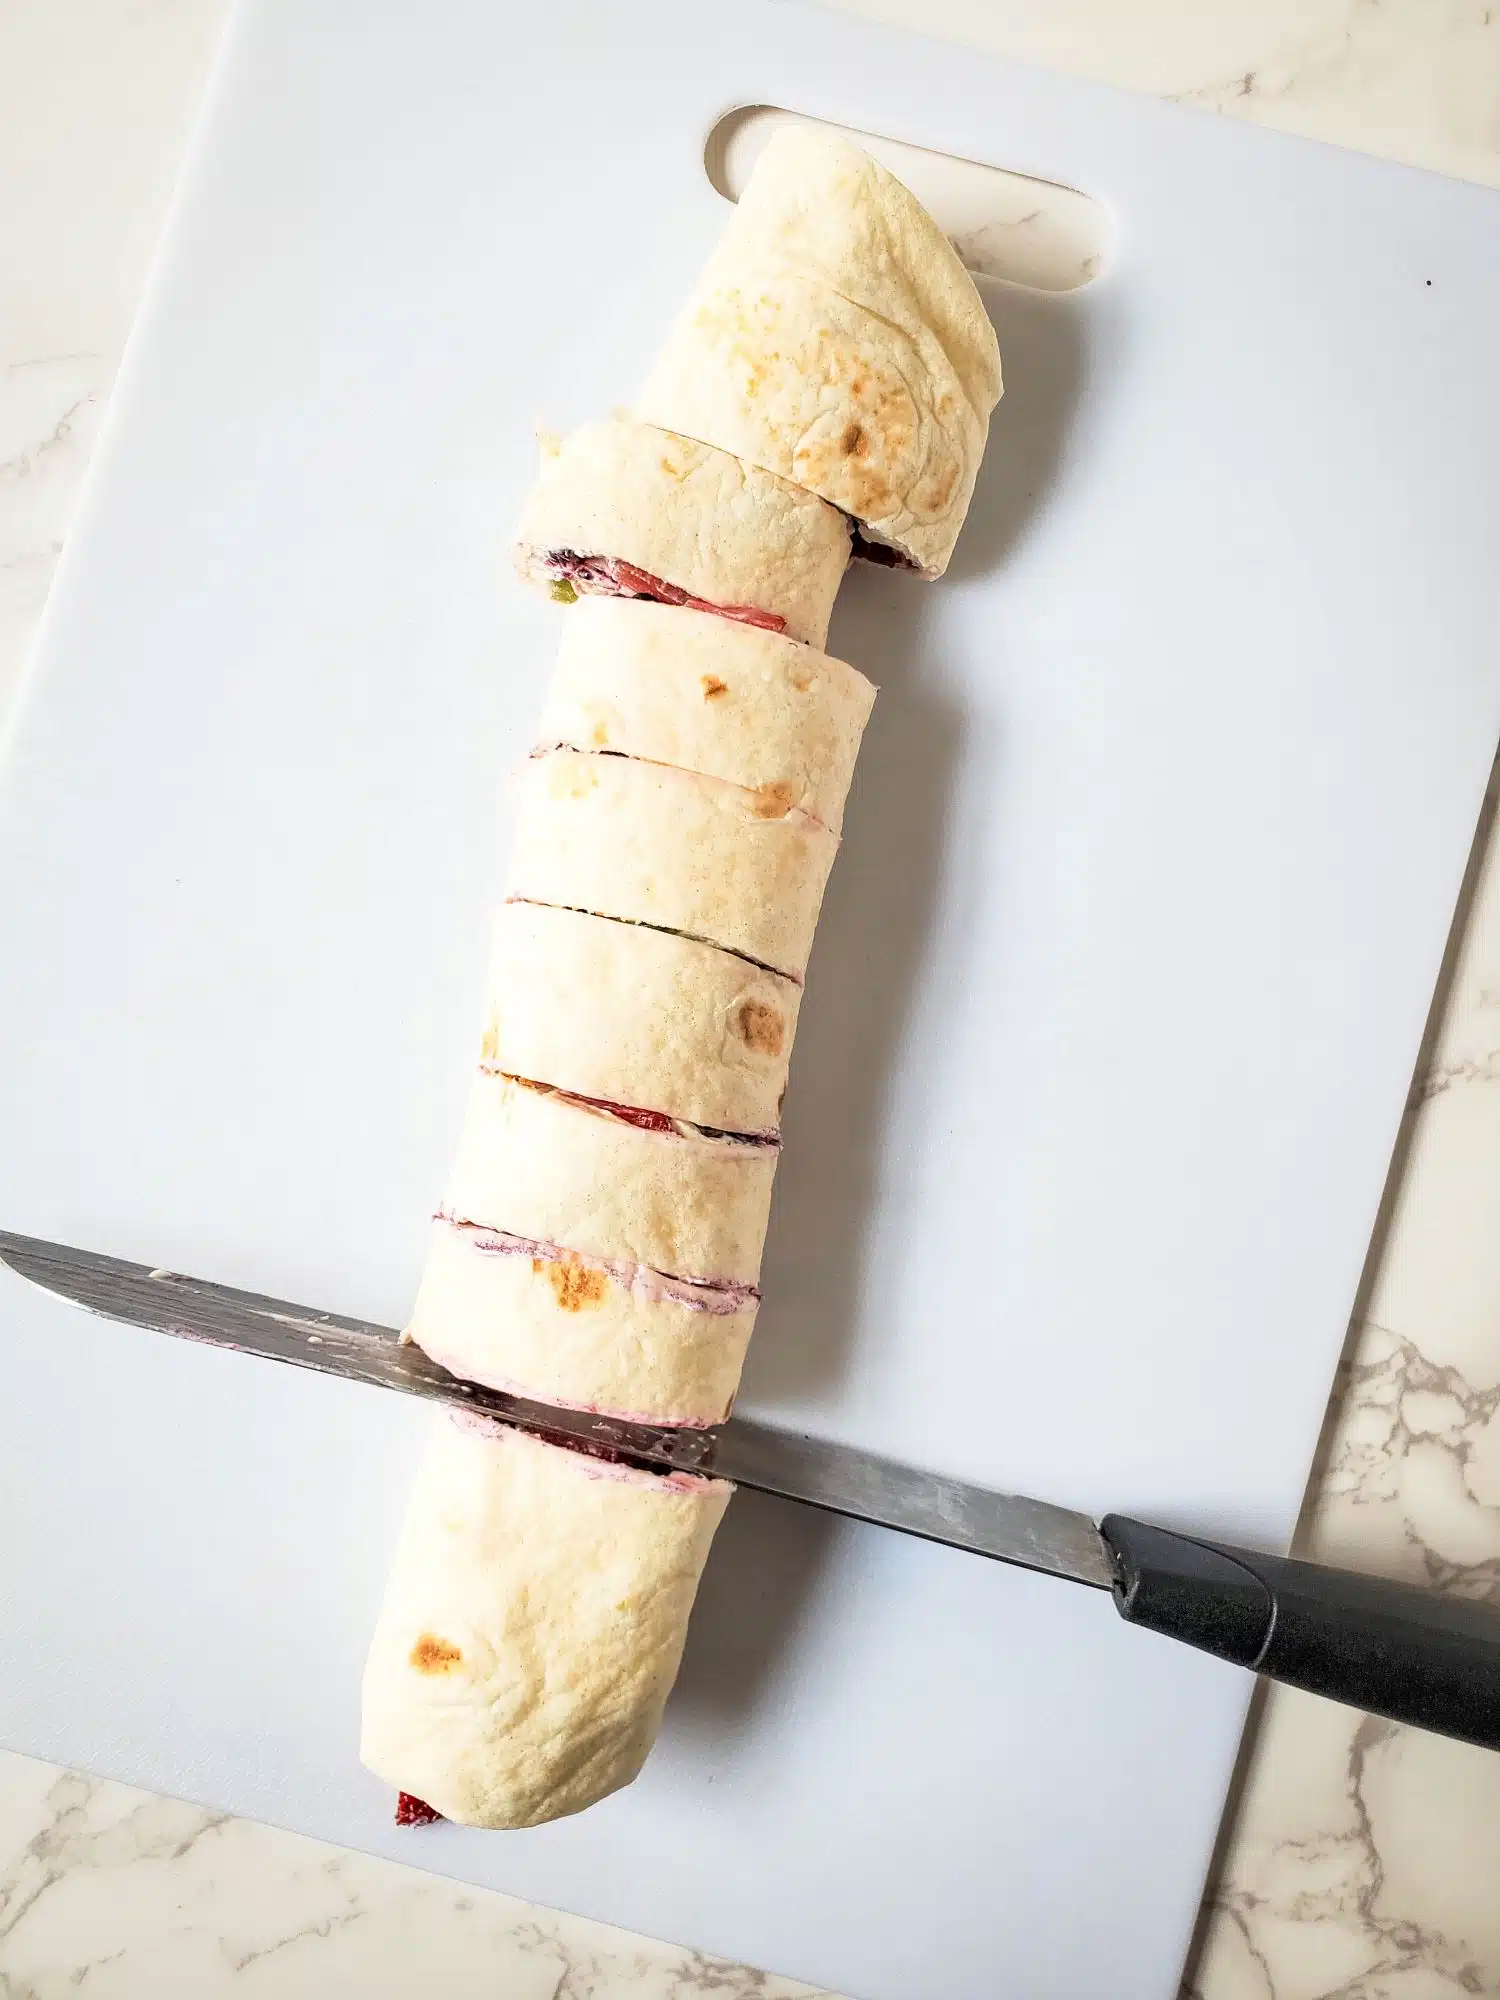 A burrito on a cutting board with a knife.